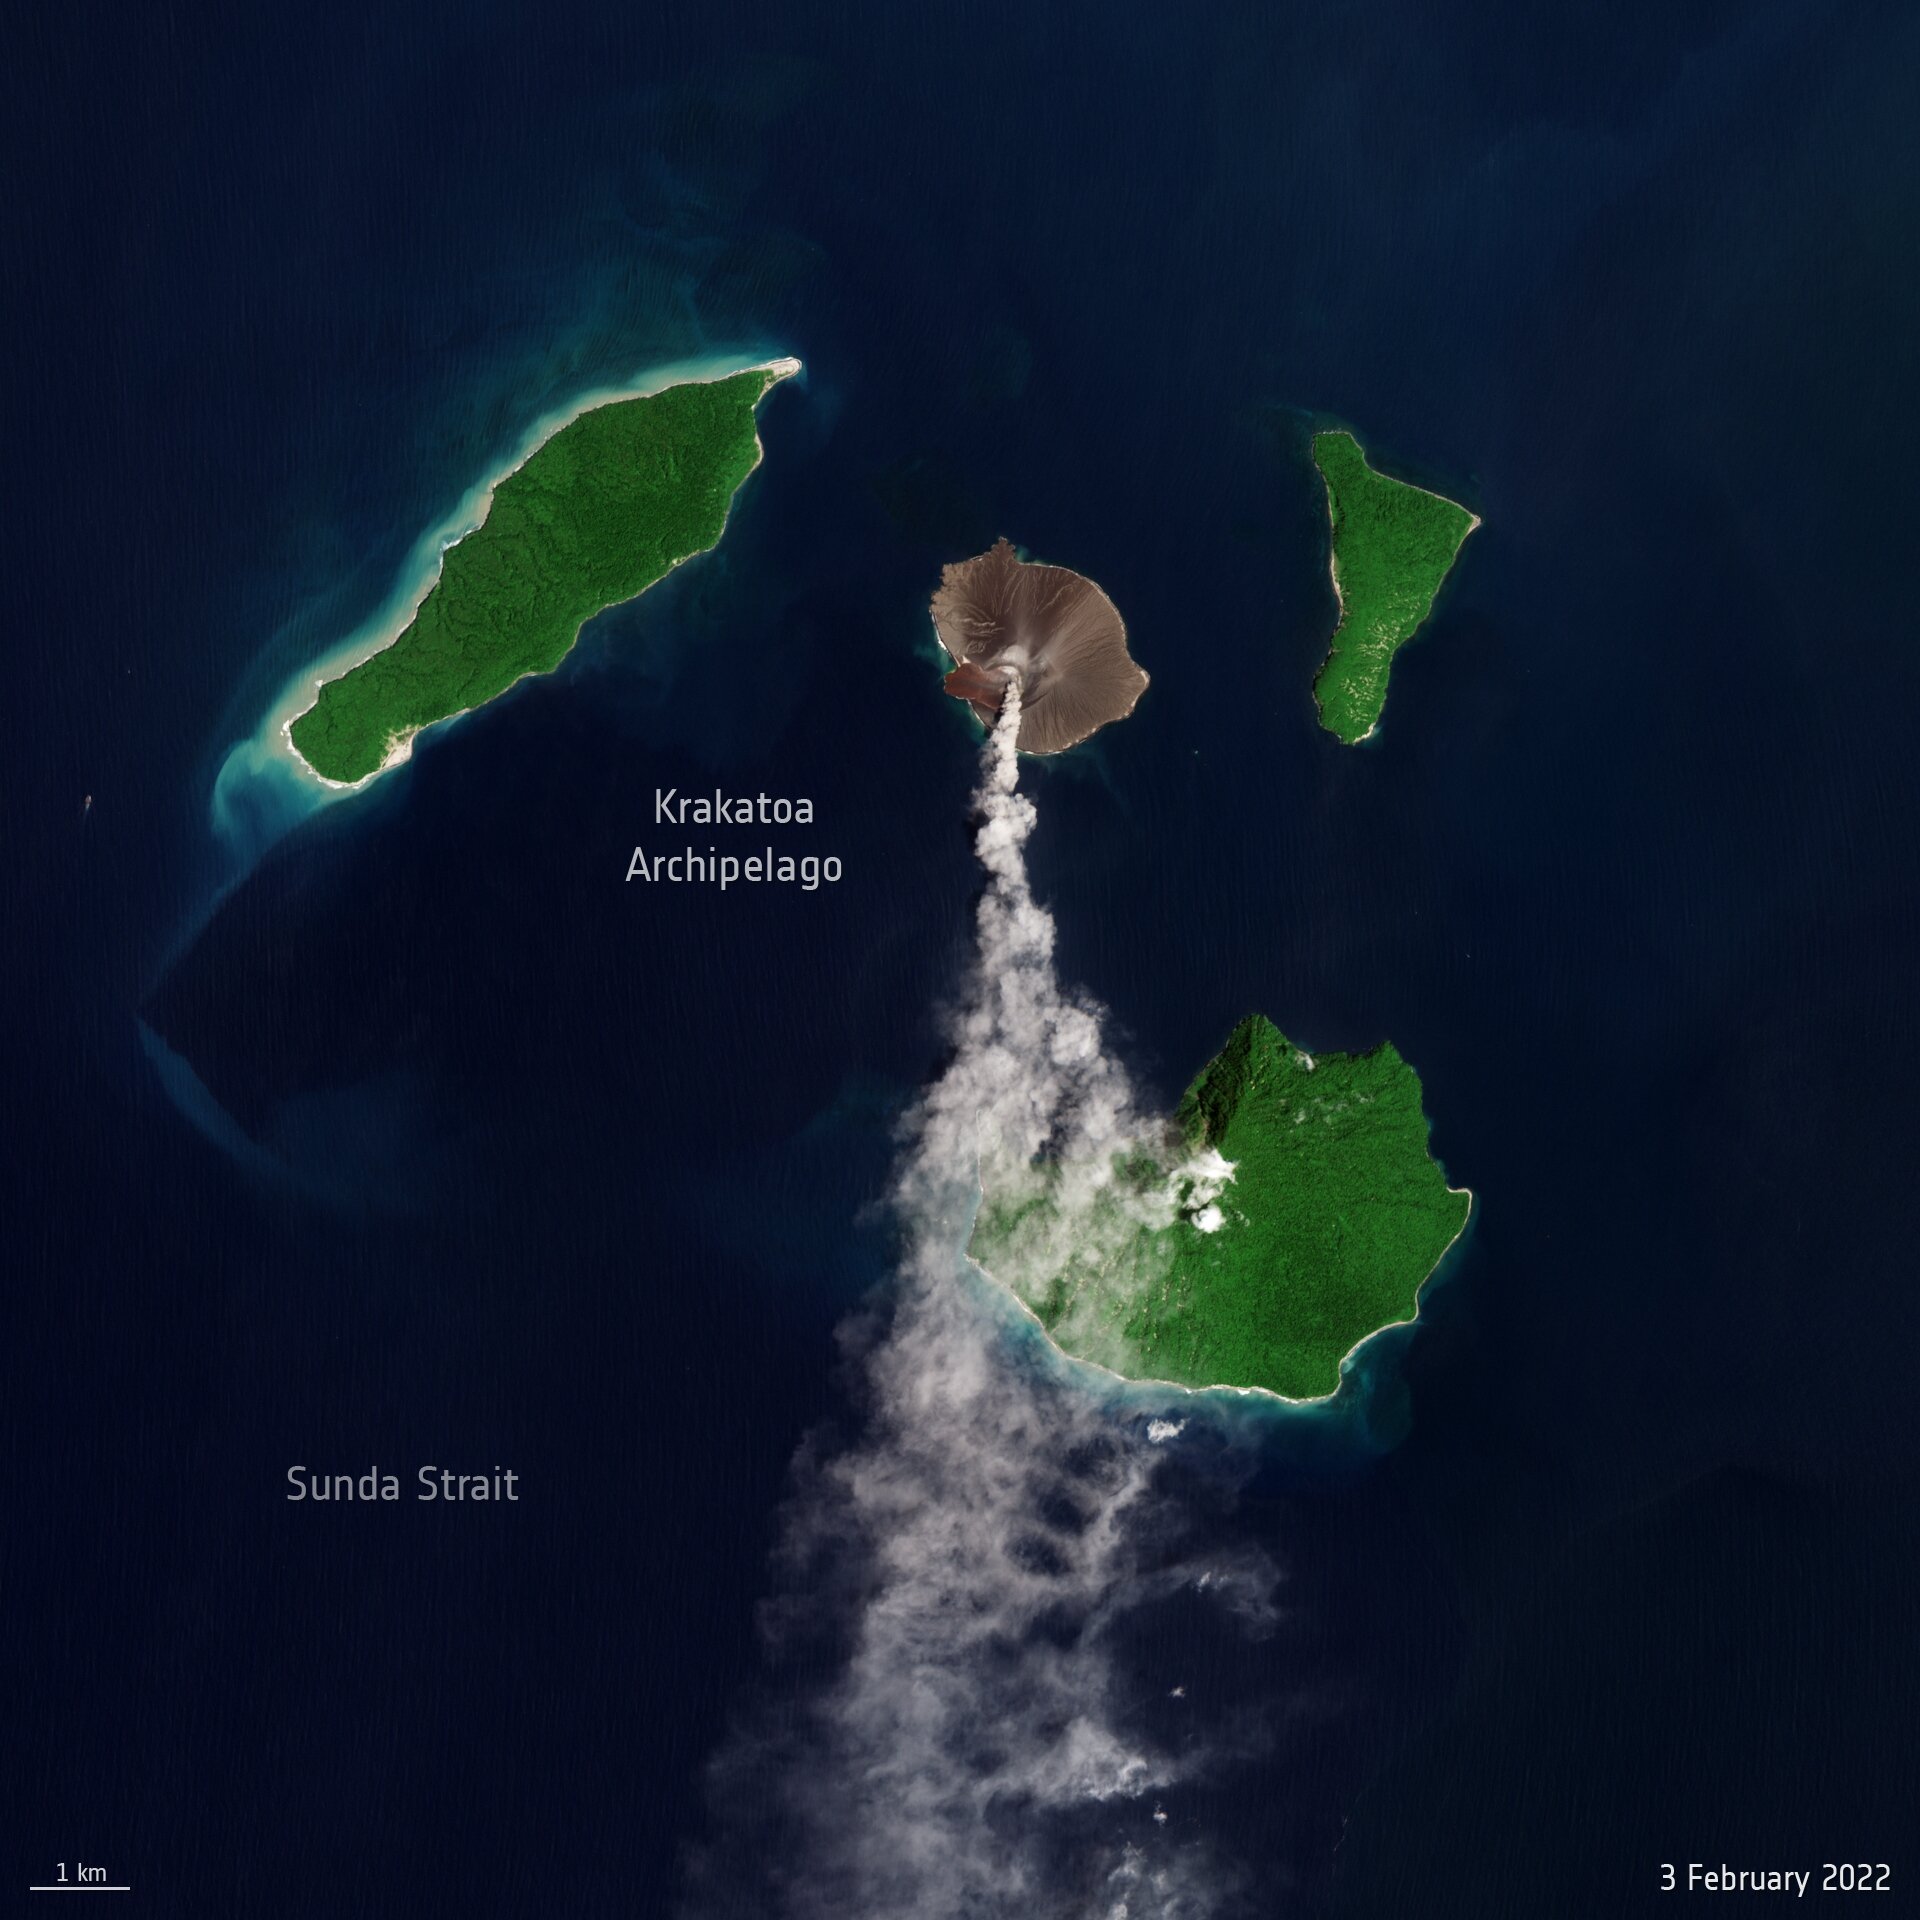 A new eruption started at the Anak Krakatoa volcano in Indonesia on 3 February 2022, as seen in this image captured by the Copernicus Sentinel-2 mission.